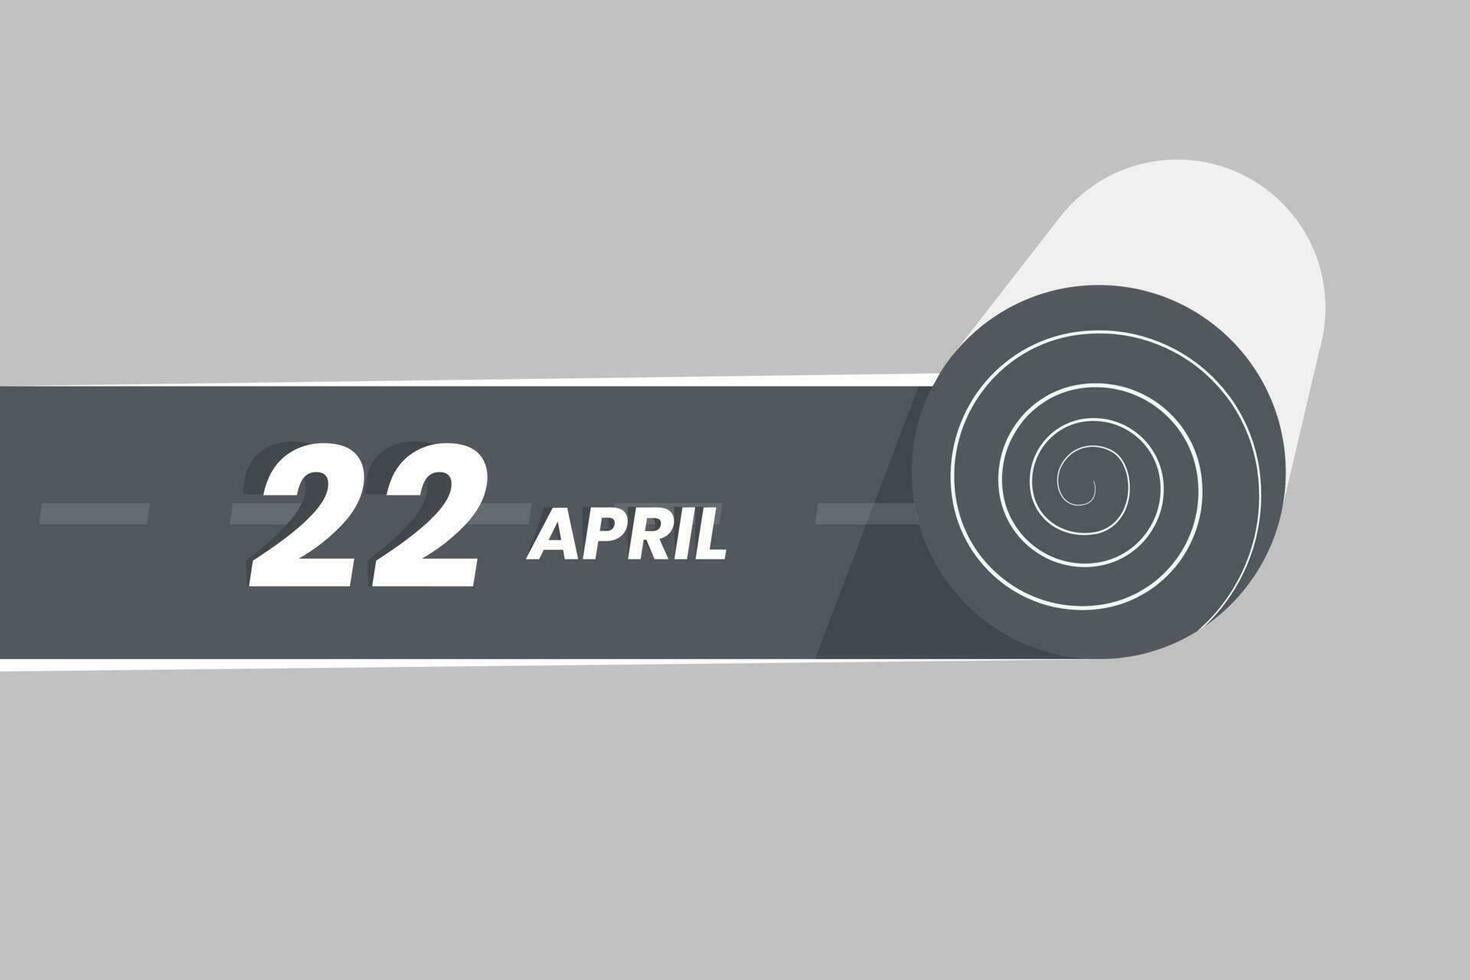 April 22 calendar icon rolling inside the road. 22 April Date Month icon vector illustrator.